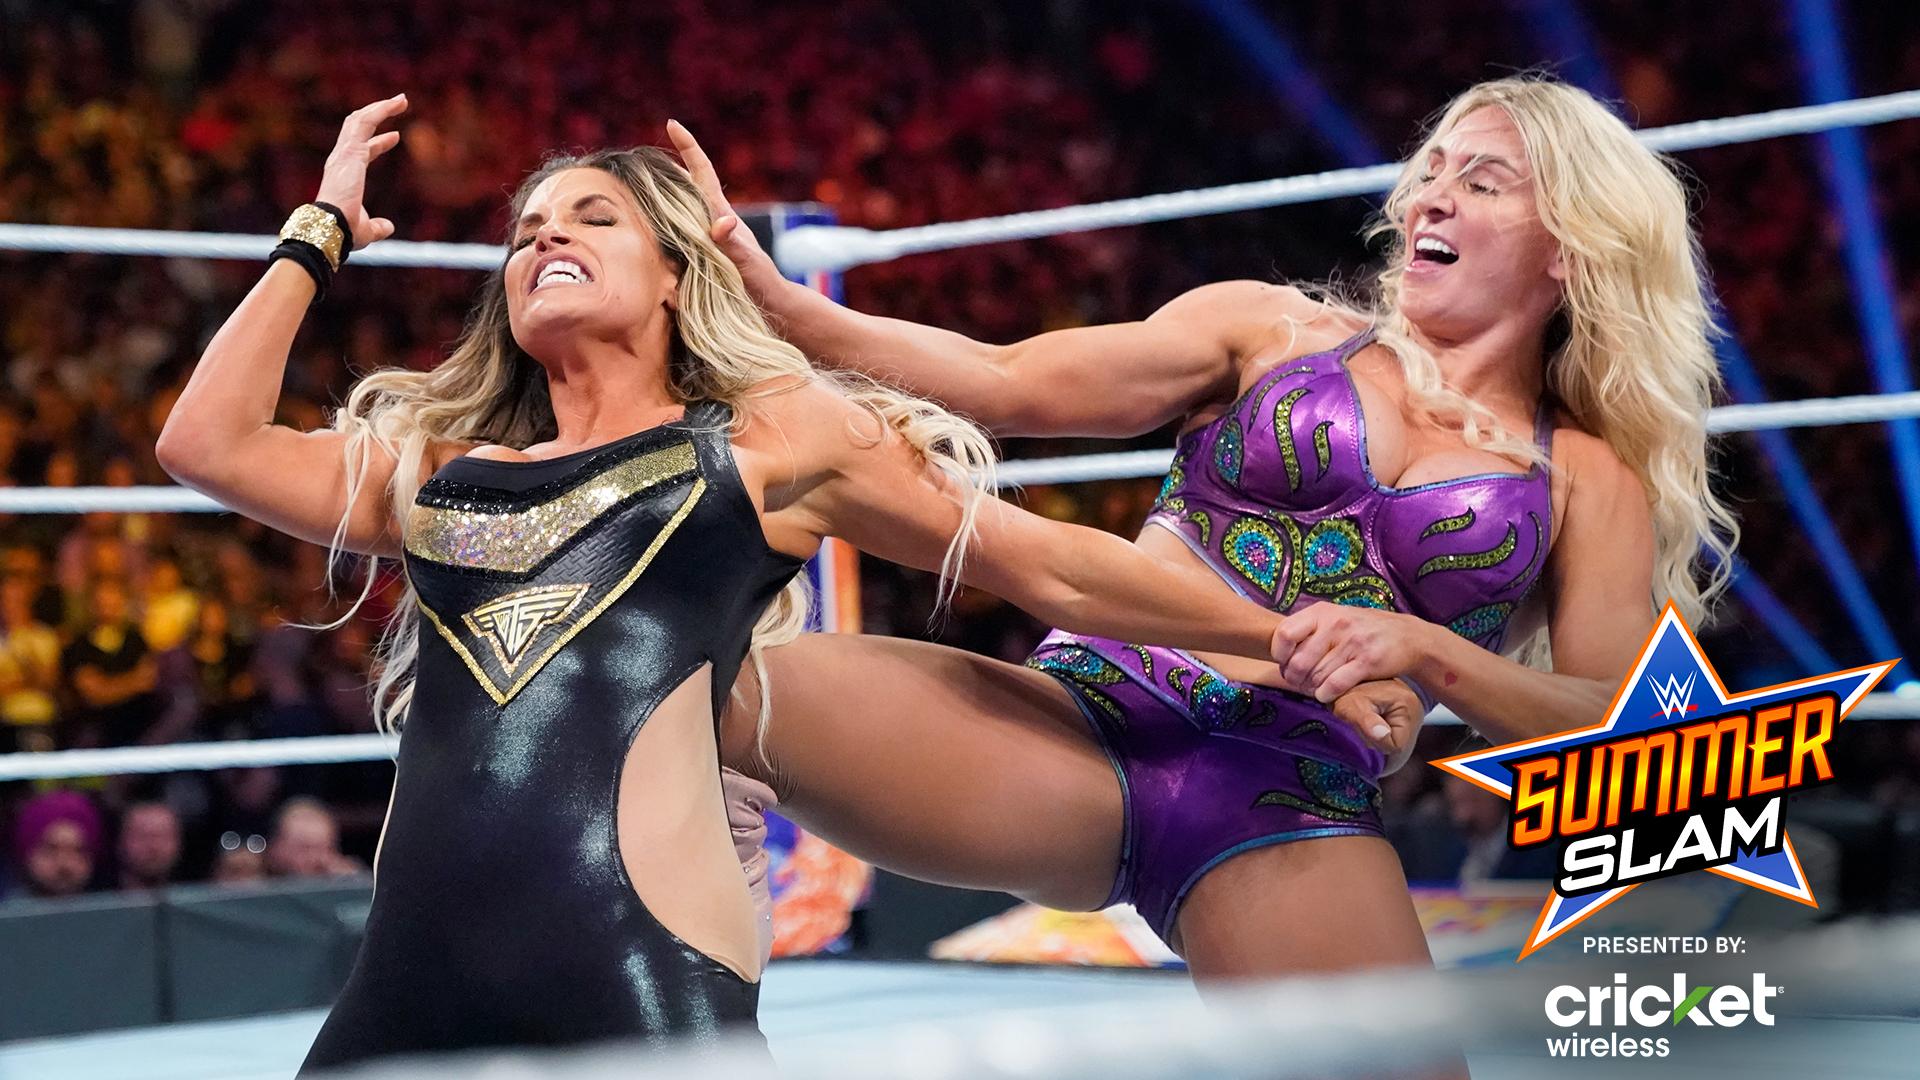 A photo of Trish Stratus and Charlotte Flair at WWE SummerSlam.